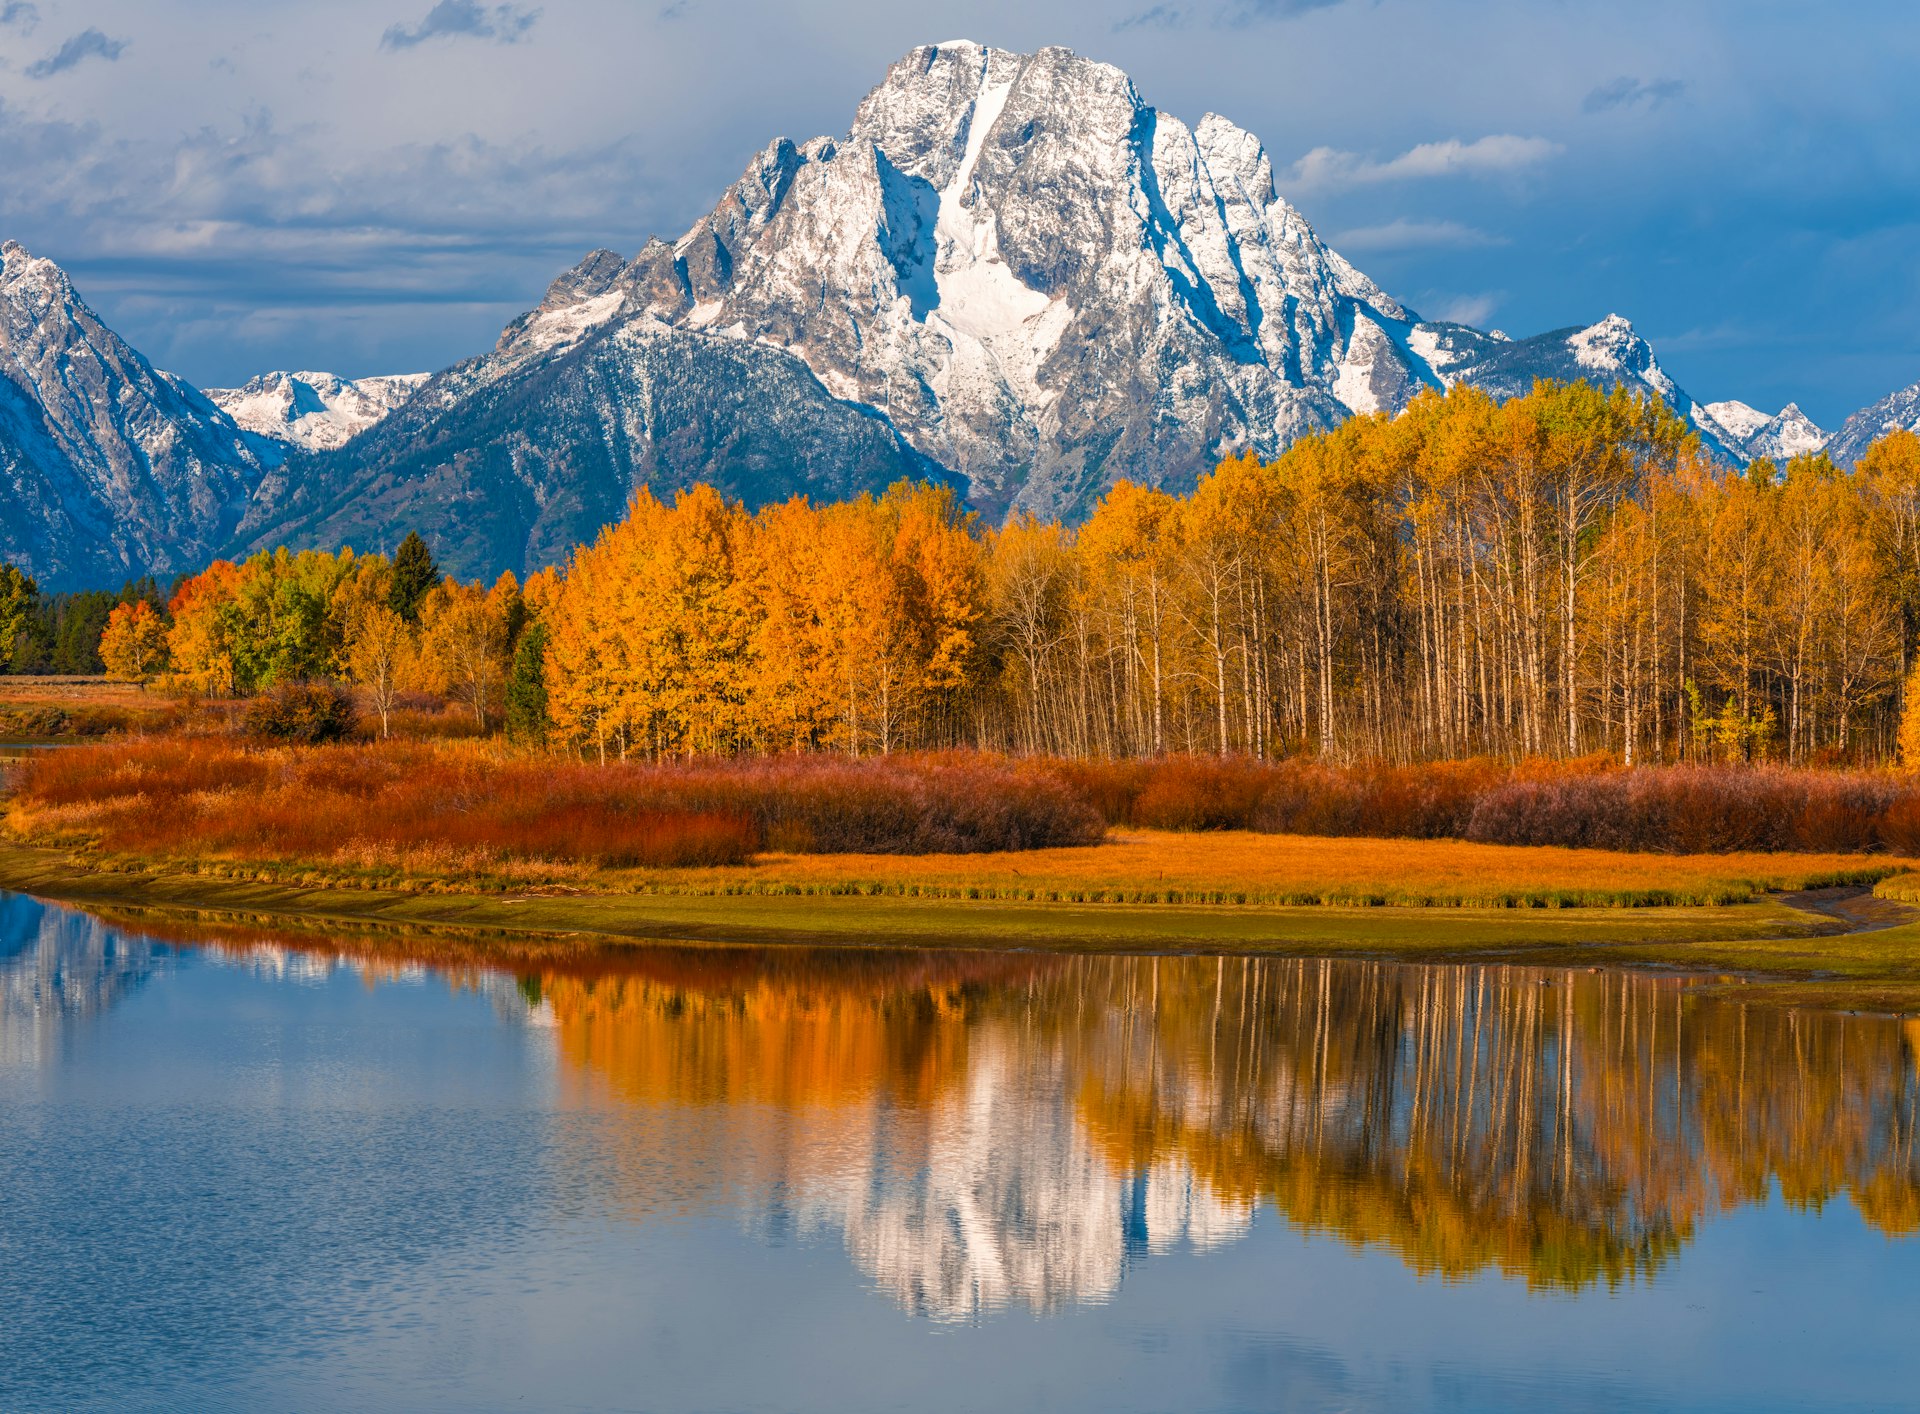  Fall Foliage changes organe and yellow and gold in front of a snow-covered mountain in Grand Teton National Park